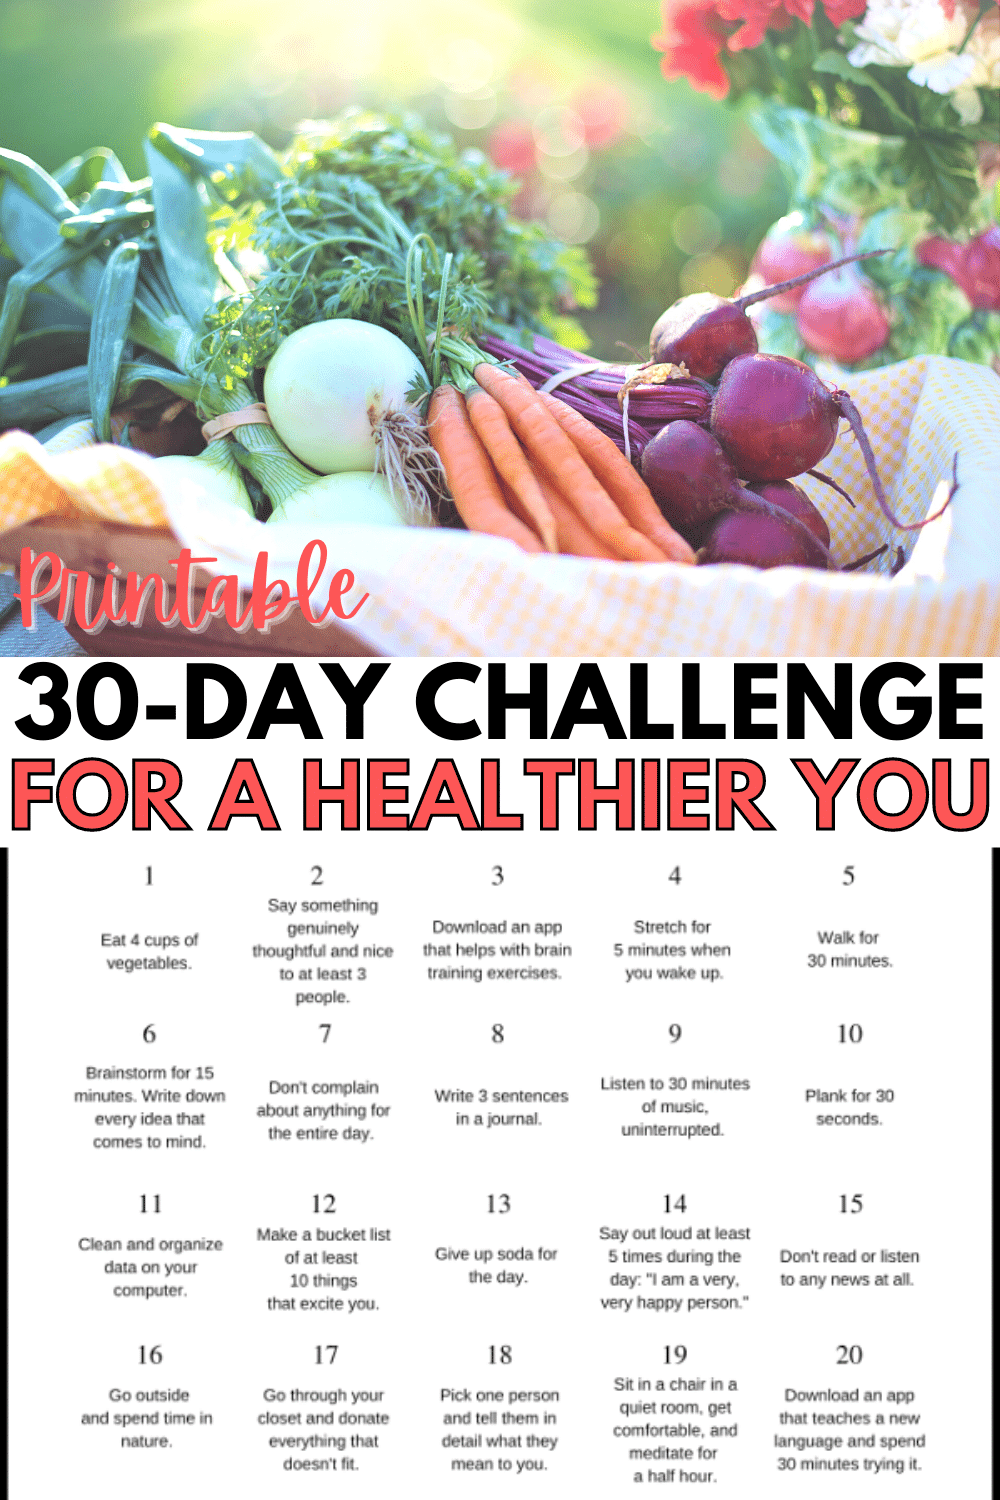 30-day challenge to achieve a healthier version of yourself.